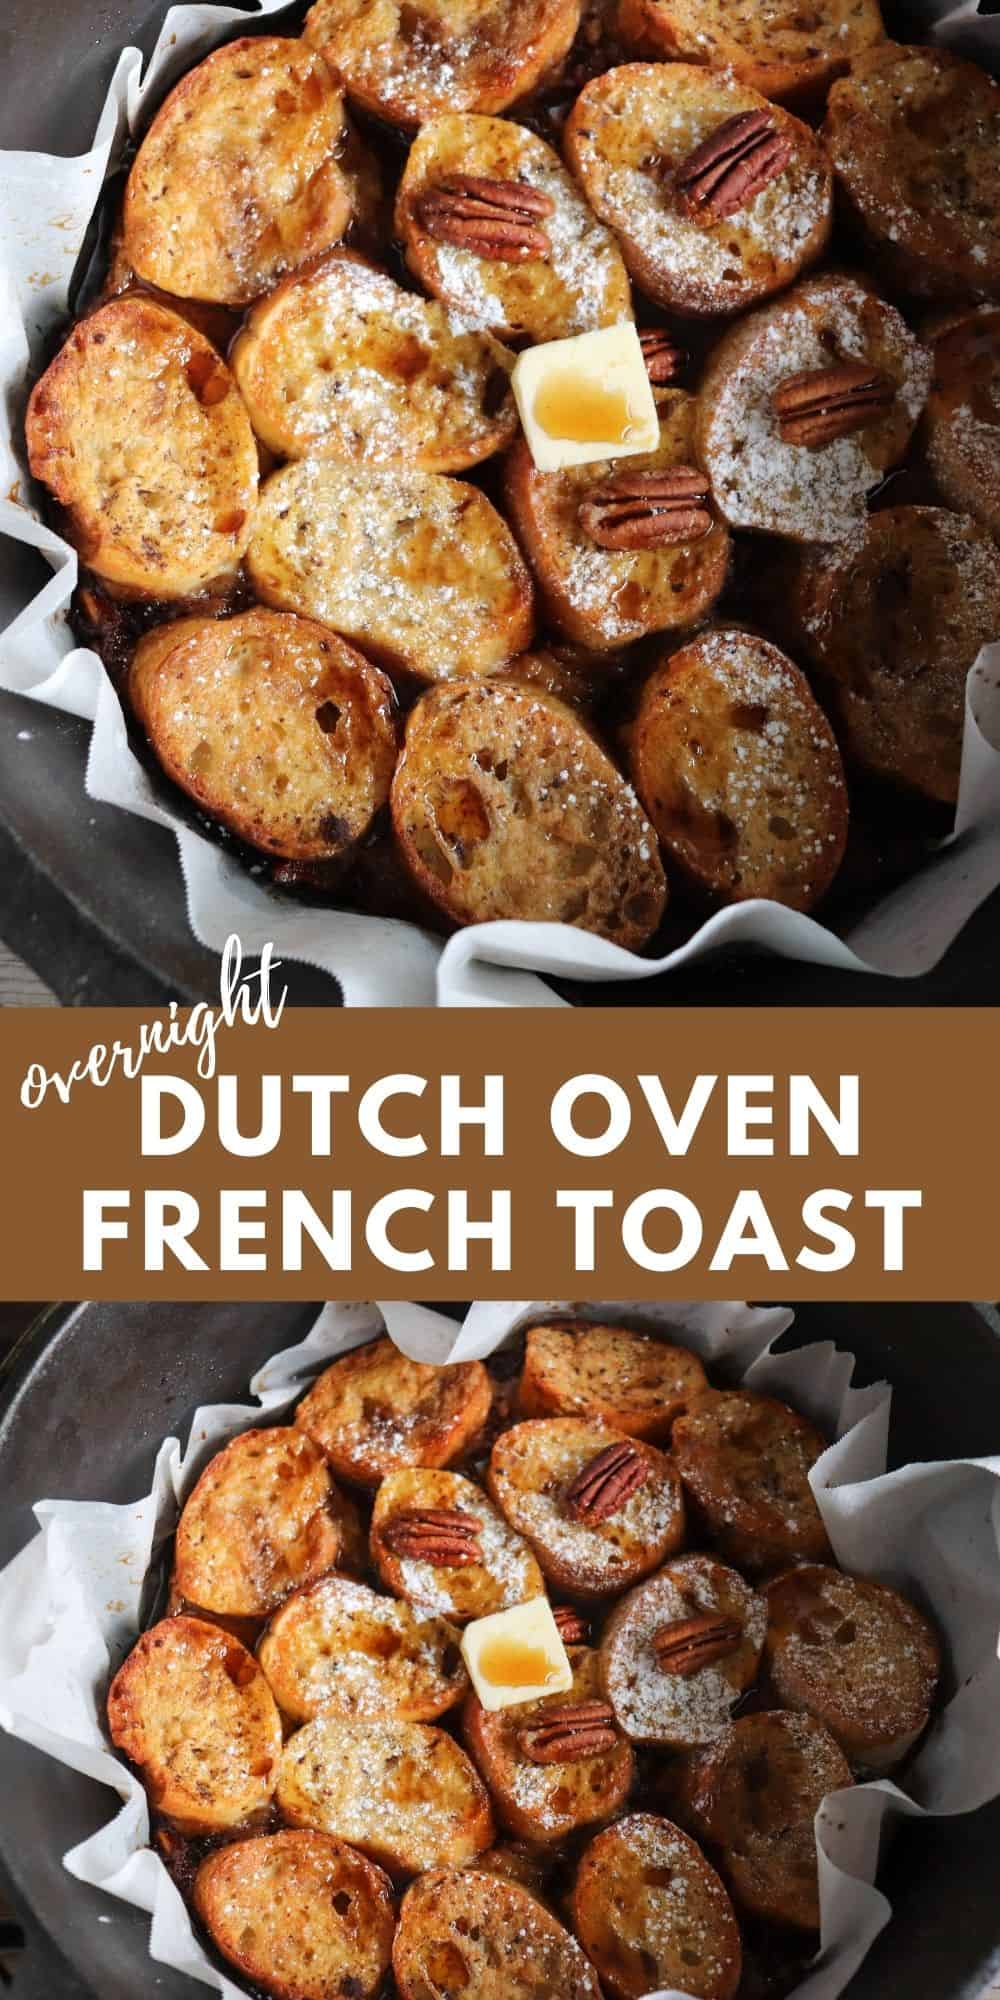 https://campfirefoodie.com/wp-content/uploads/2021/03/Overnight-Dutch-Oven-French-Toast8.jpg